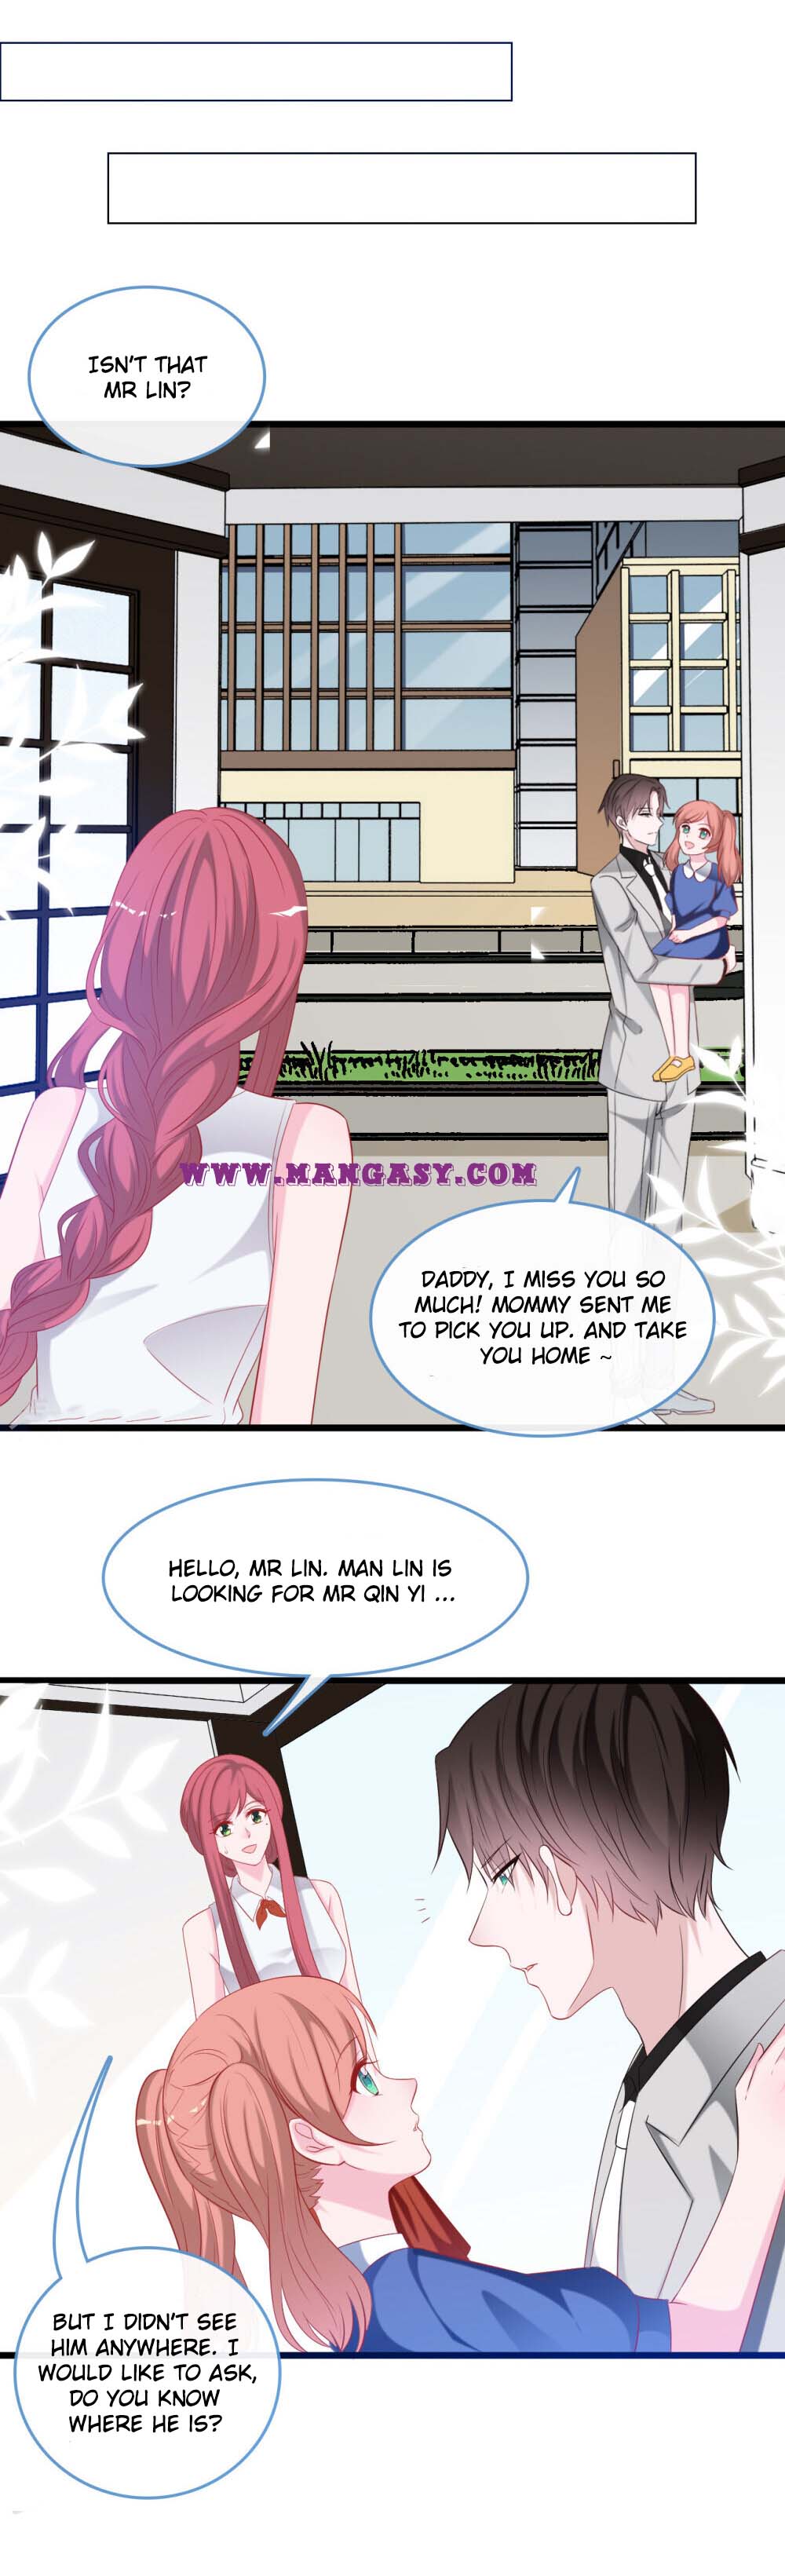 President Daddy Is Chasing You Chapter 125 - HolyManga.net